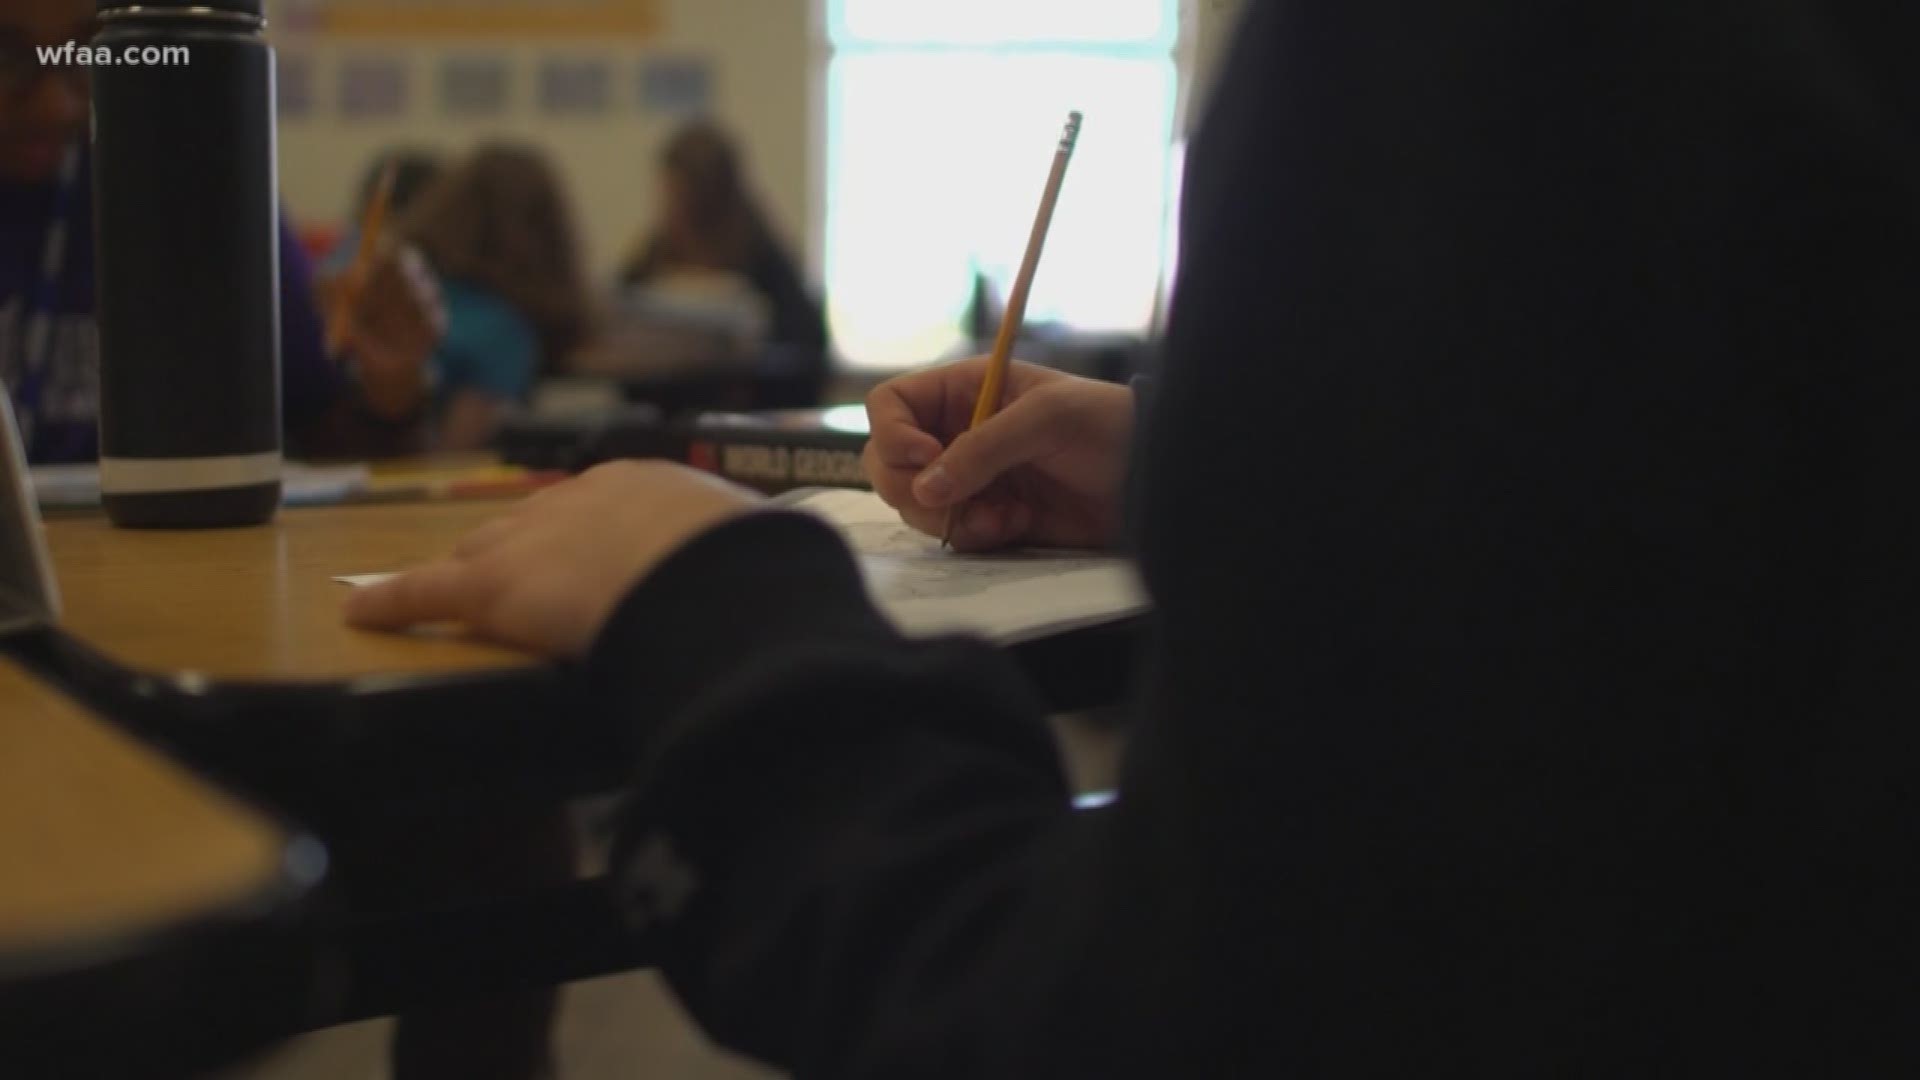 A WFAA investigation found a lack of school counselors across the state. New legislation could fix that.